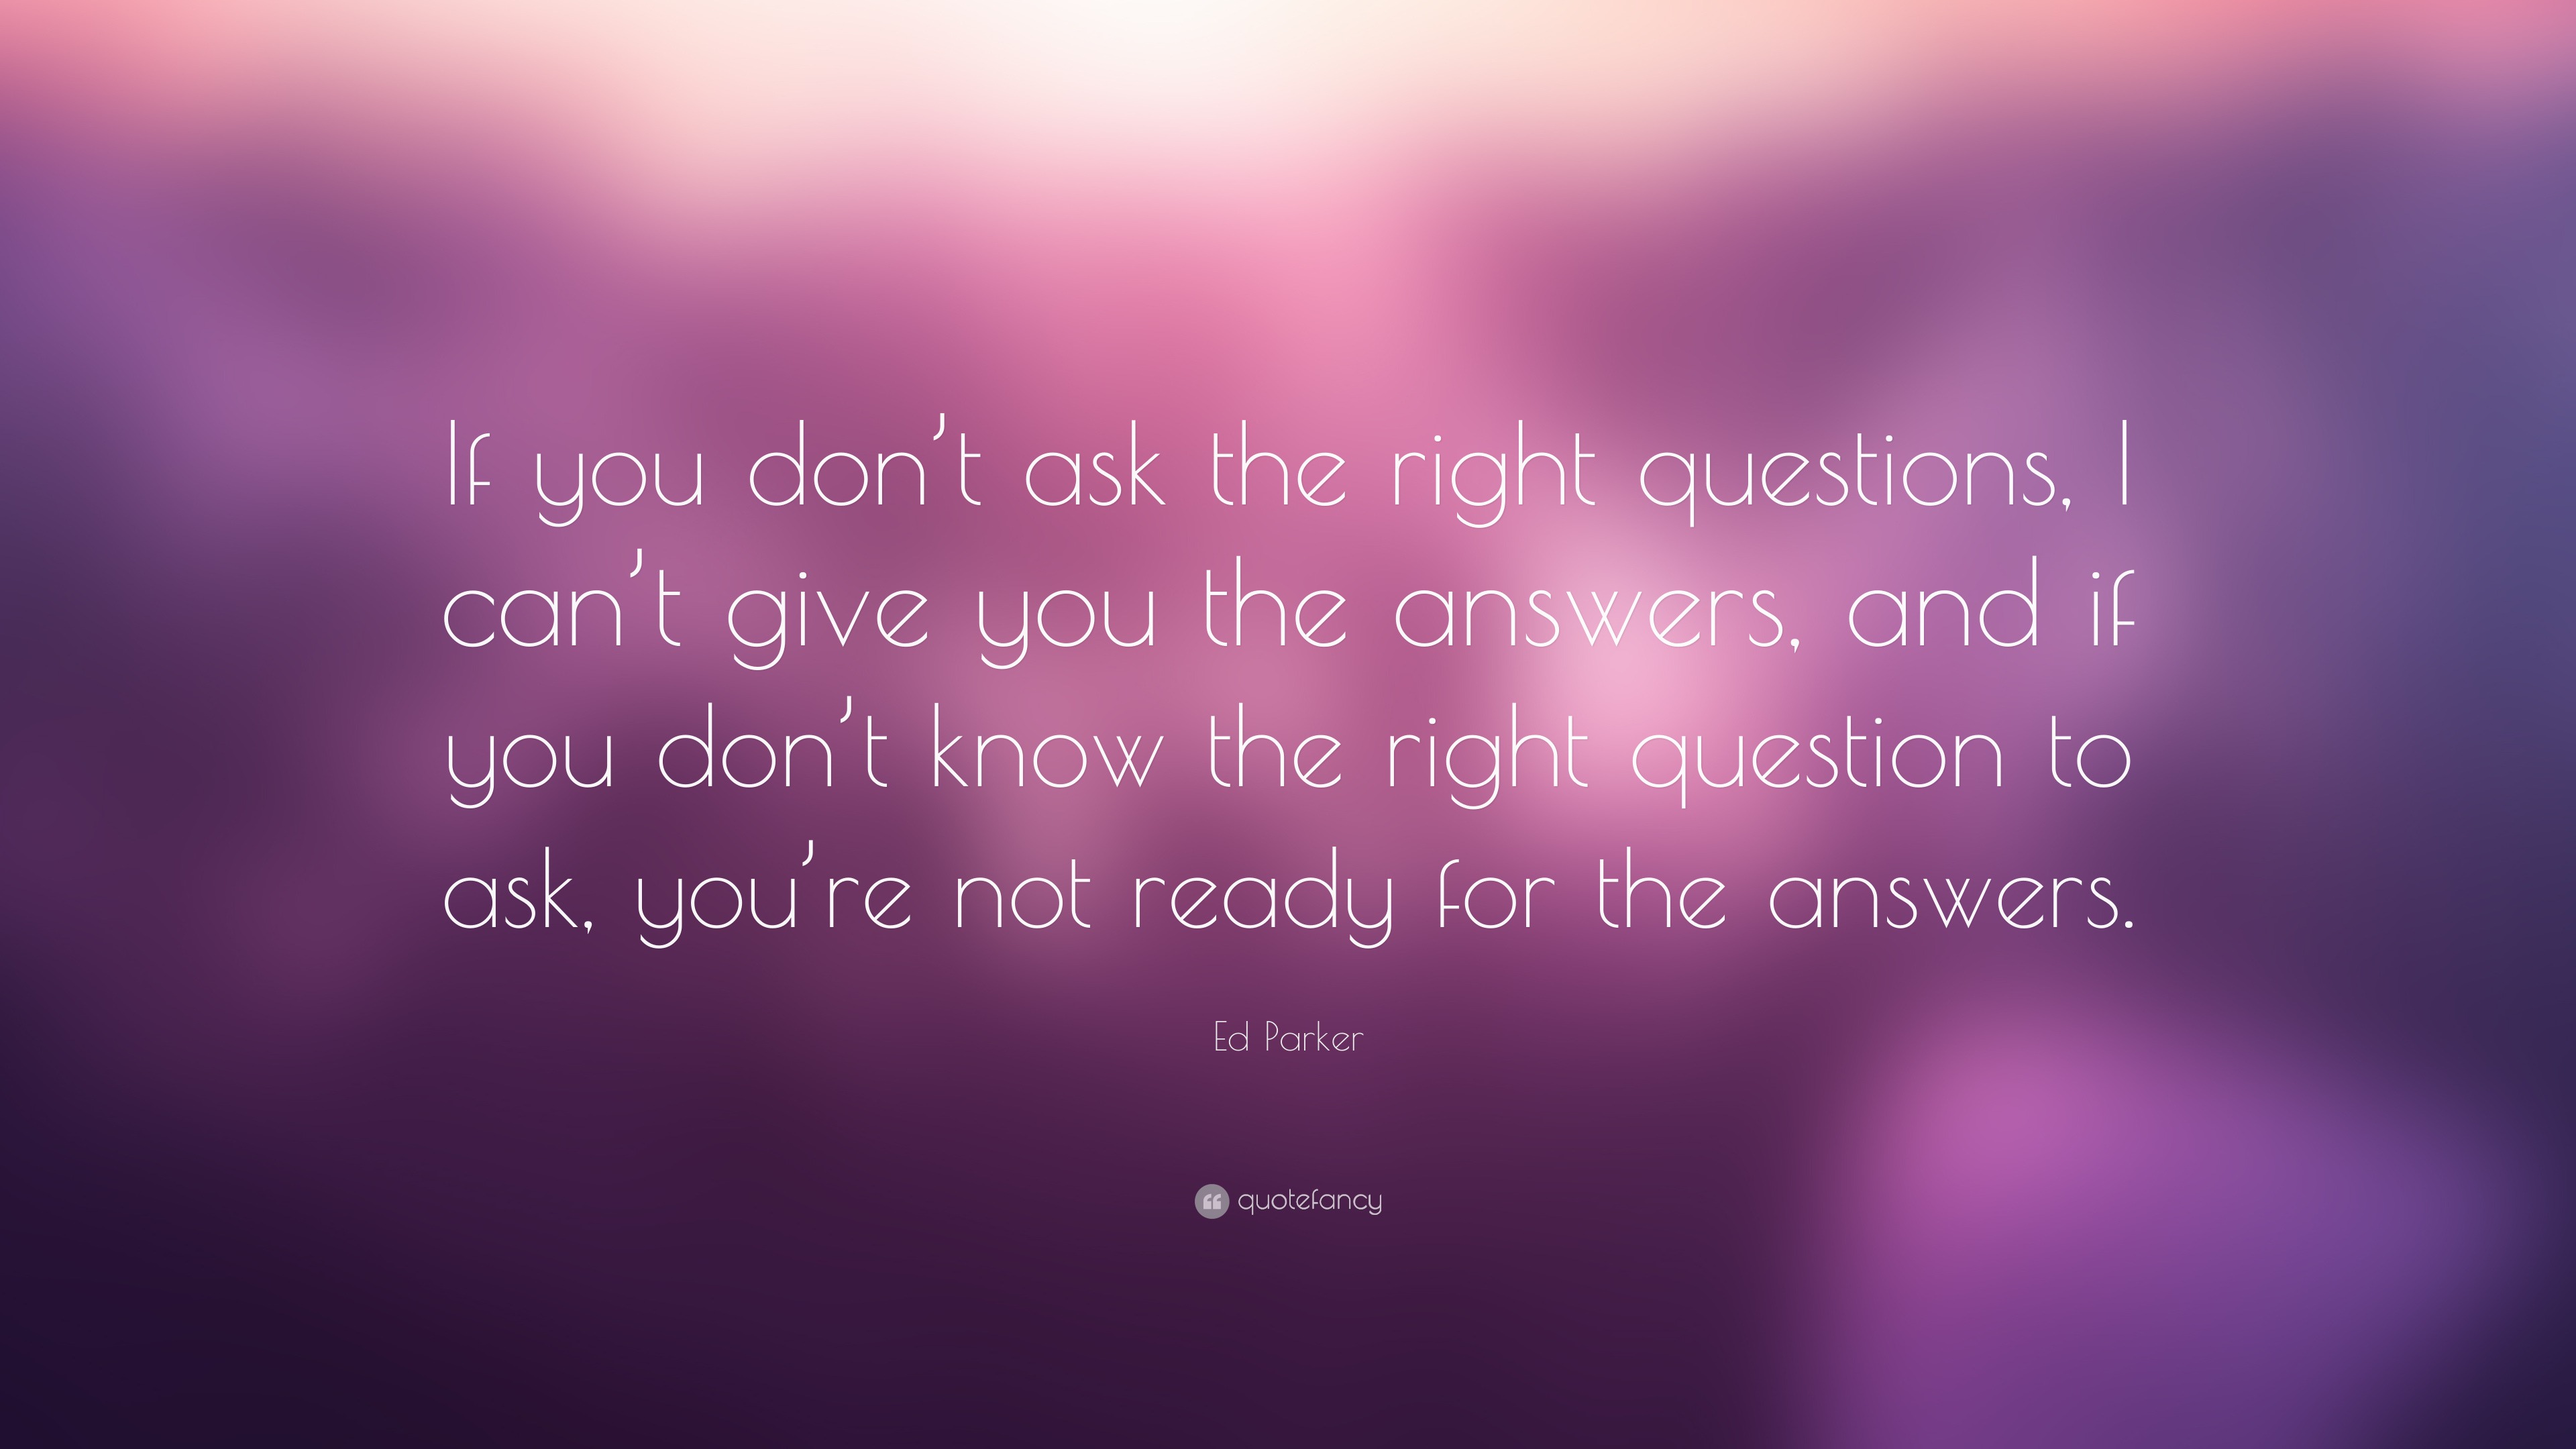 Ed Parker Quote: “If you don’t ask the right questions, I can’t give ...